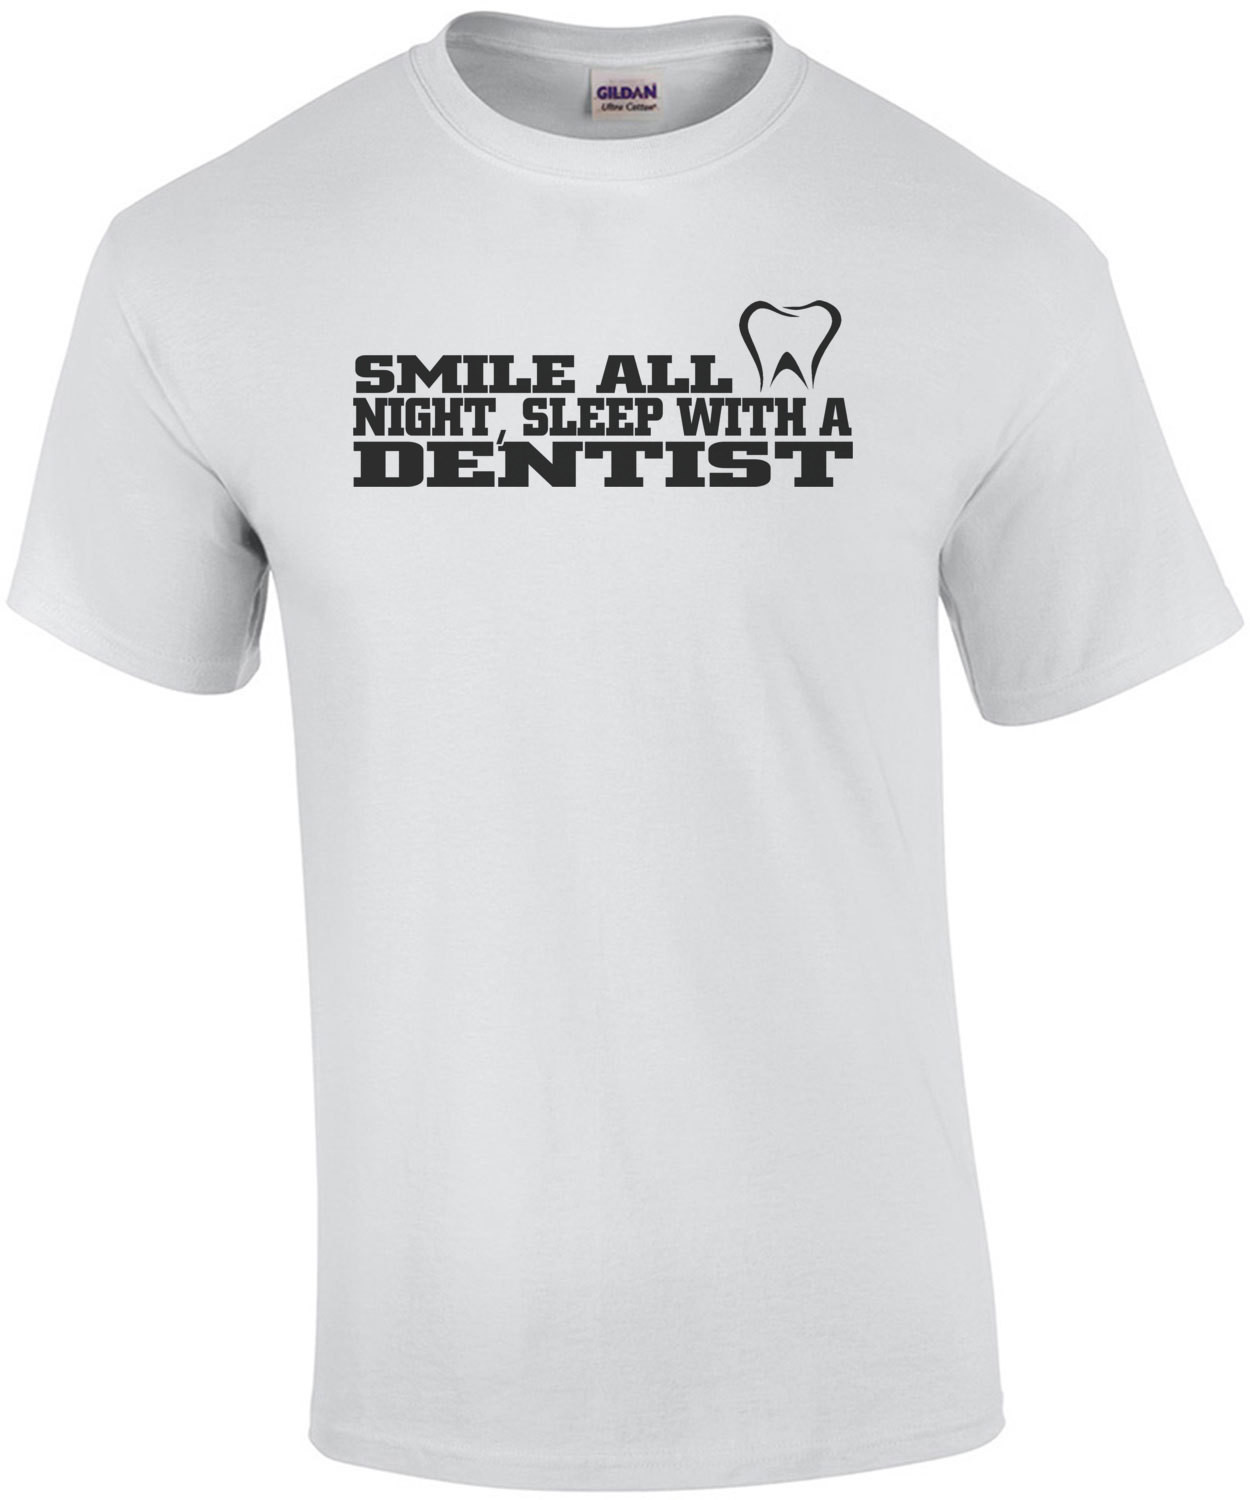 Smile All Night Sleep With A Dentist T-Shirt